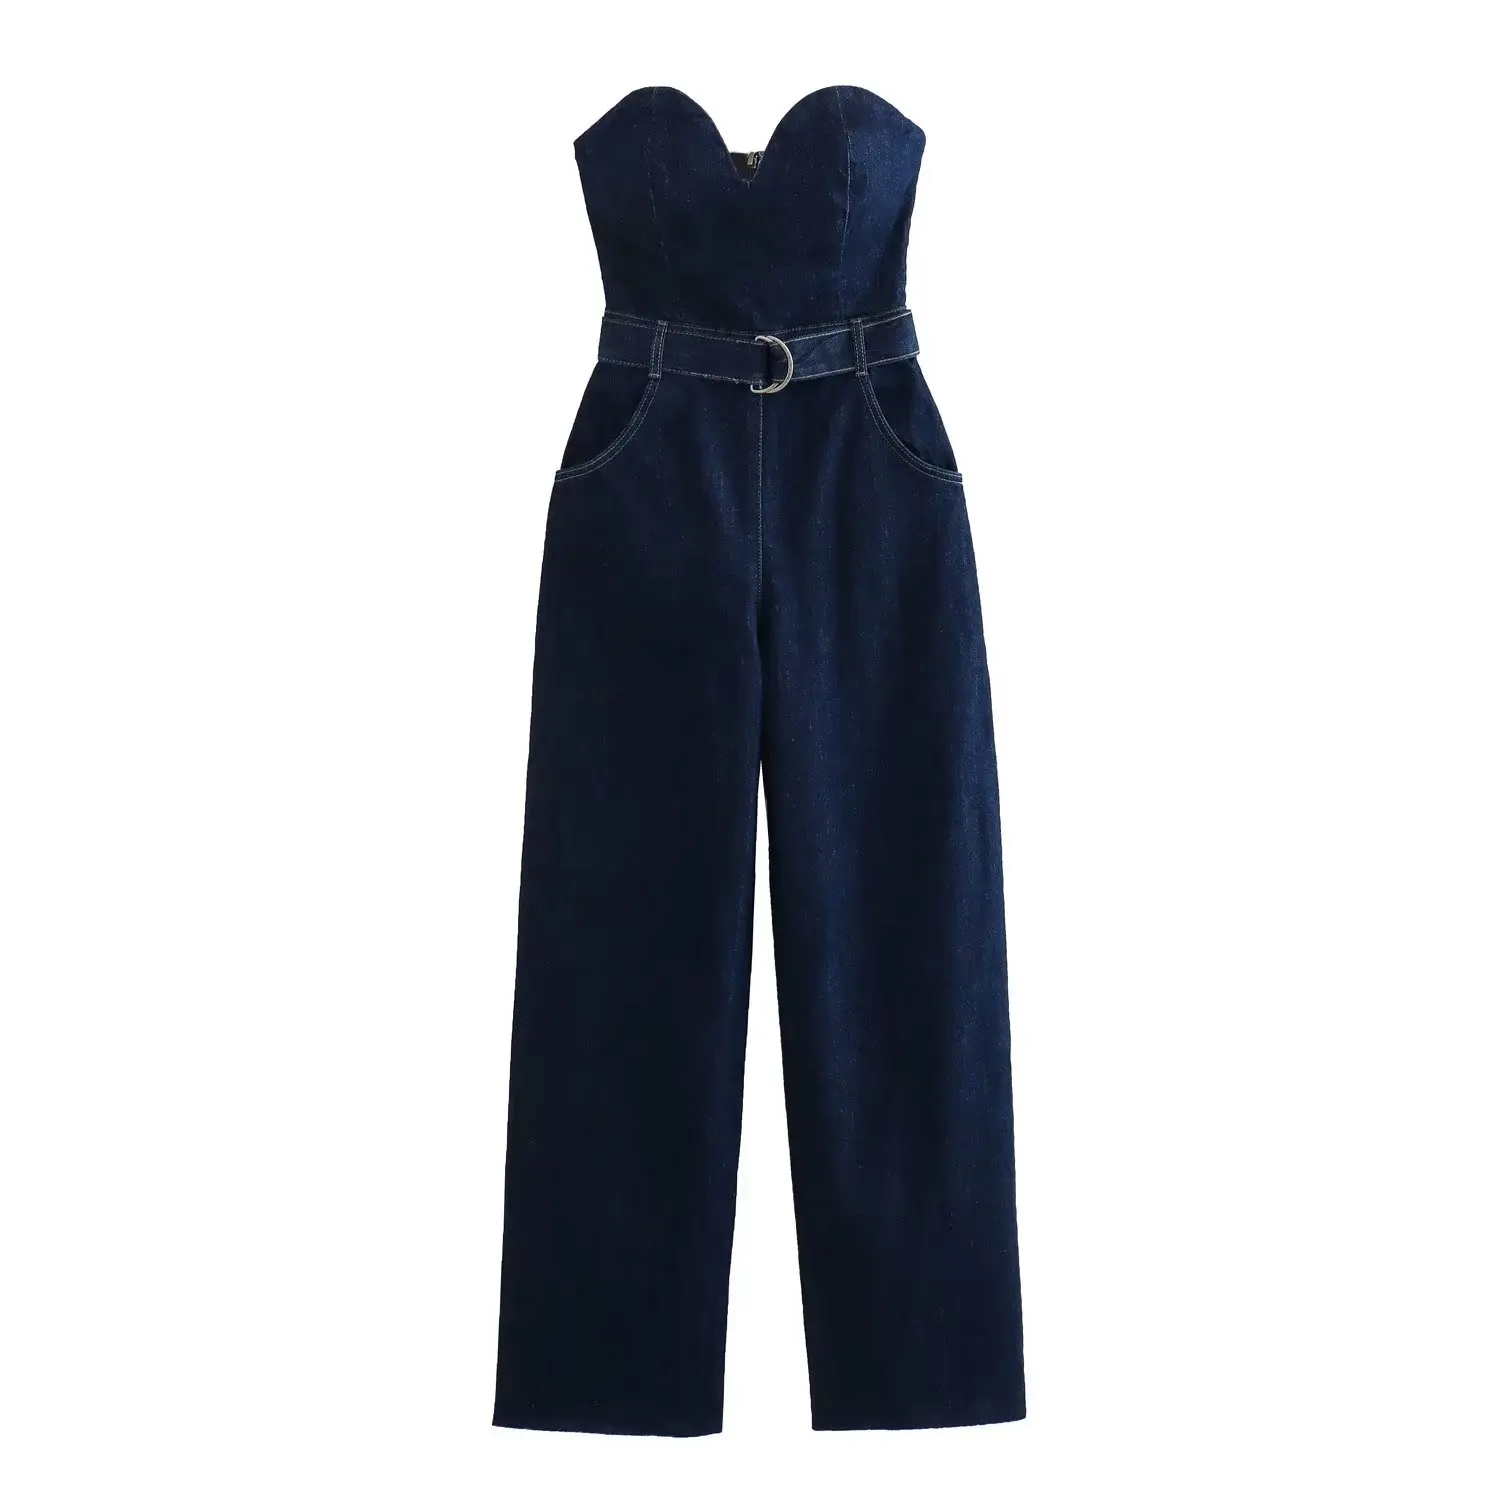 Women summer New Chic Fashion Corset jeans Jumpsuits Vintage Backless Female Playsuits Mujer